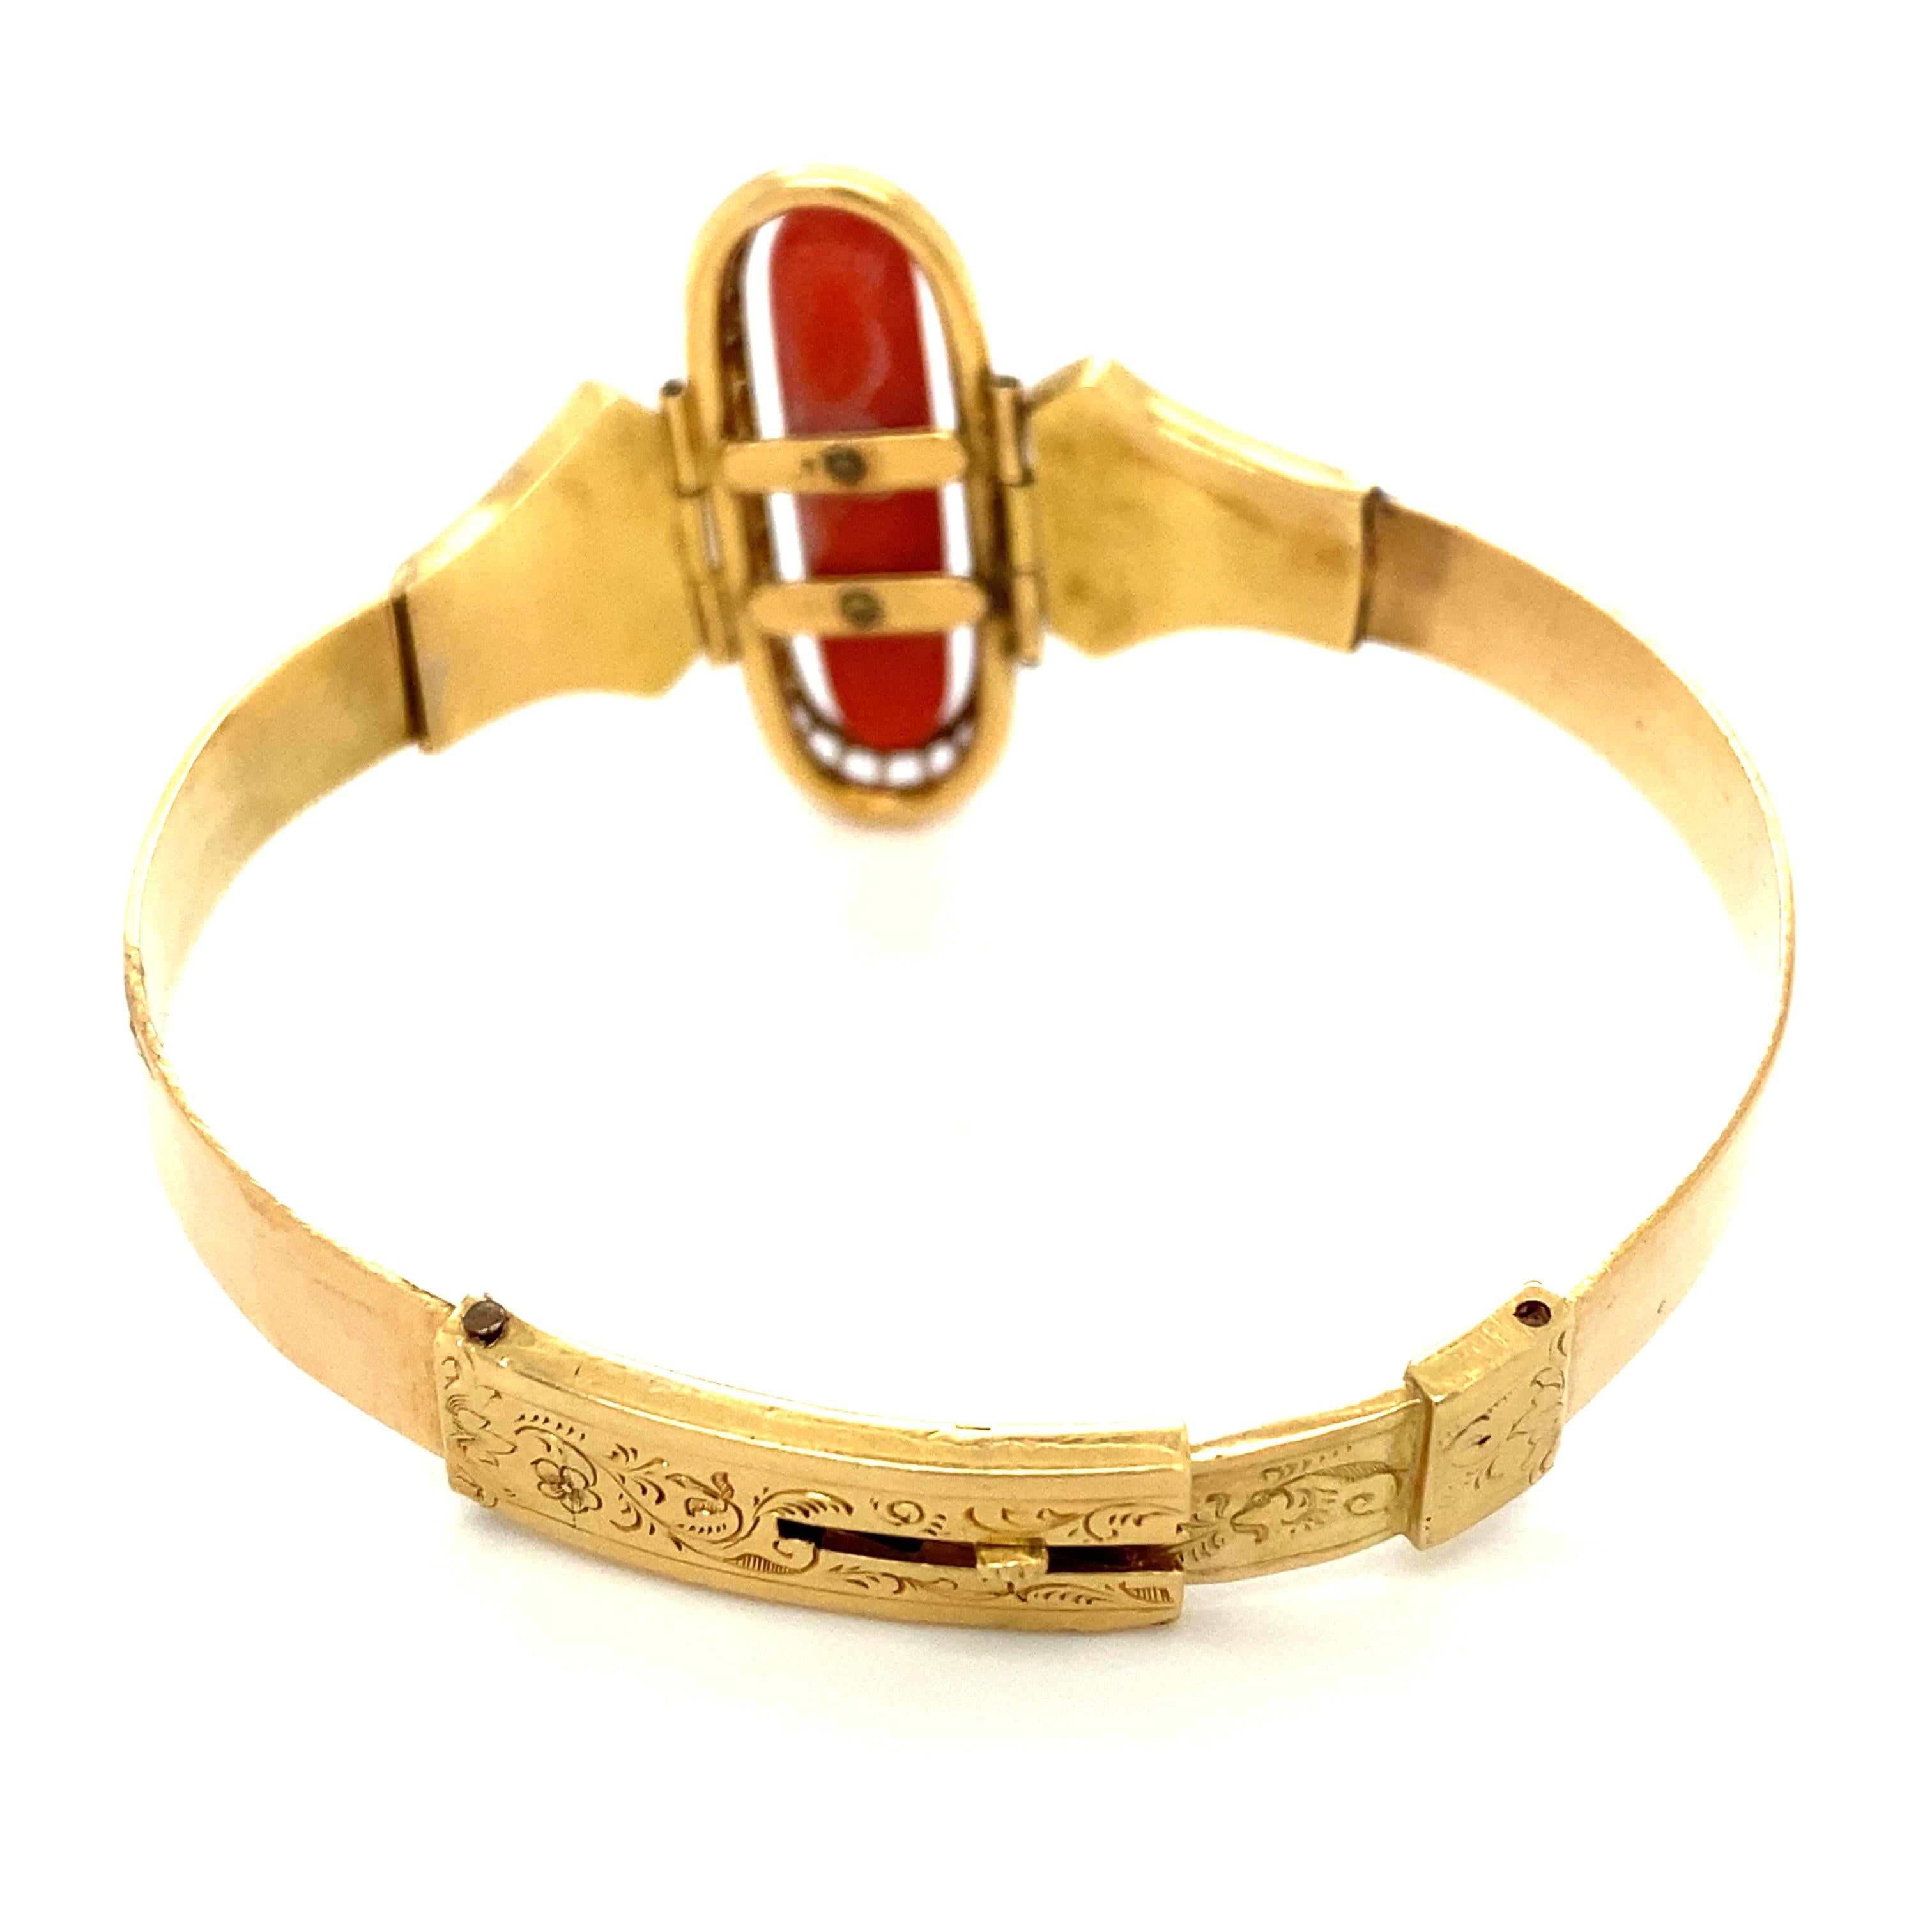 Item Details: This beautiful bracelet dates from the Victorian Period and features a large deep orange coral with diamond inlay. It has goldwork detailing on the sides and on the clasp. It has hinged around the center piece and is slightly flexible,